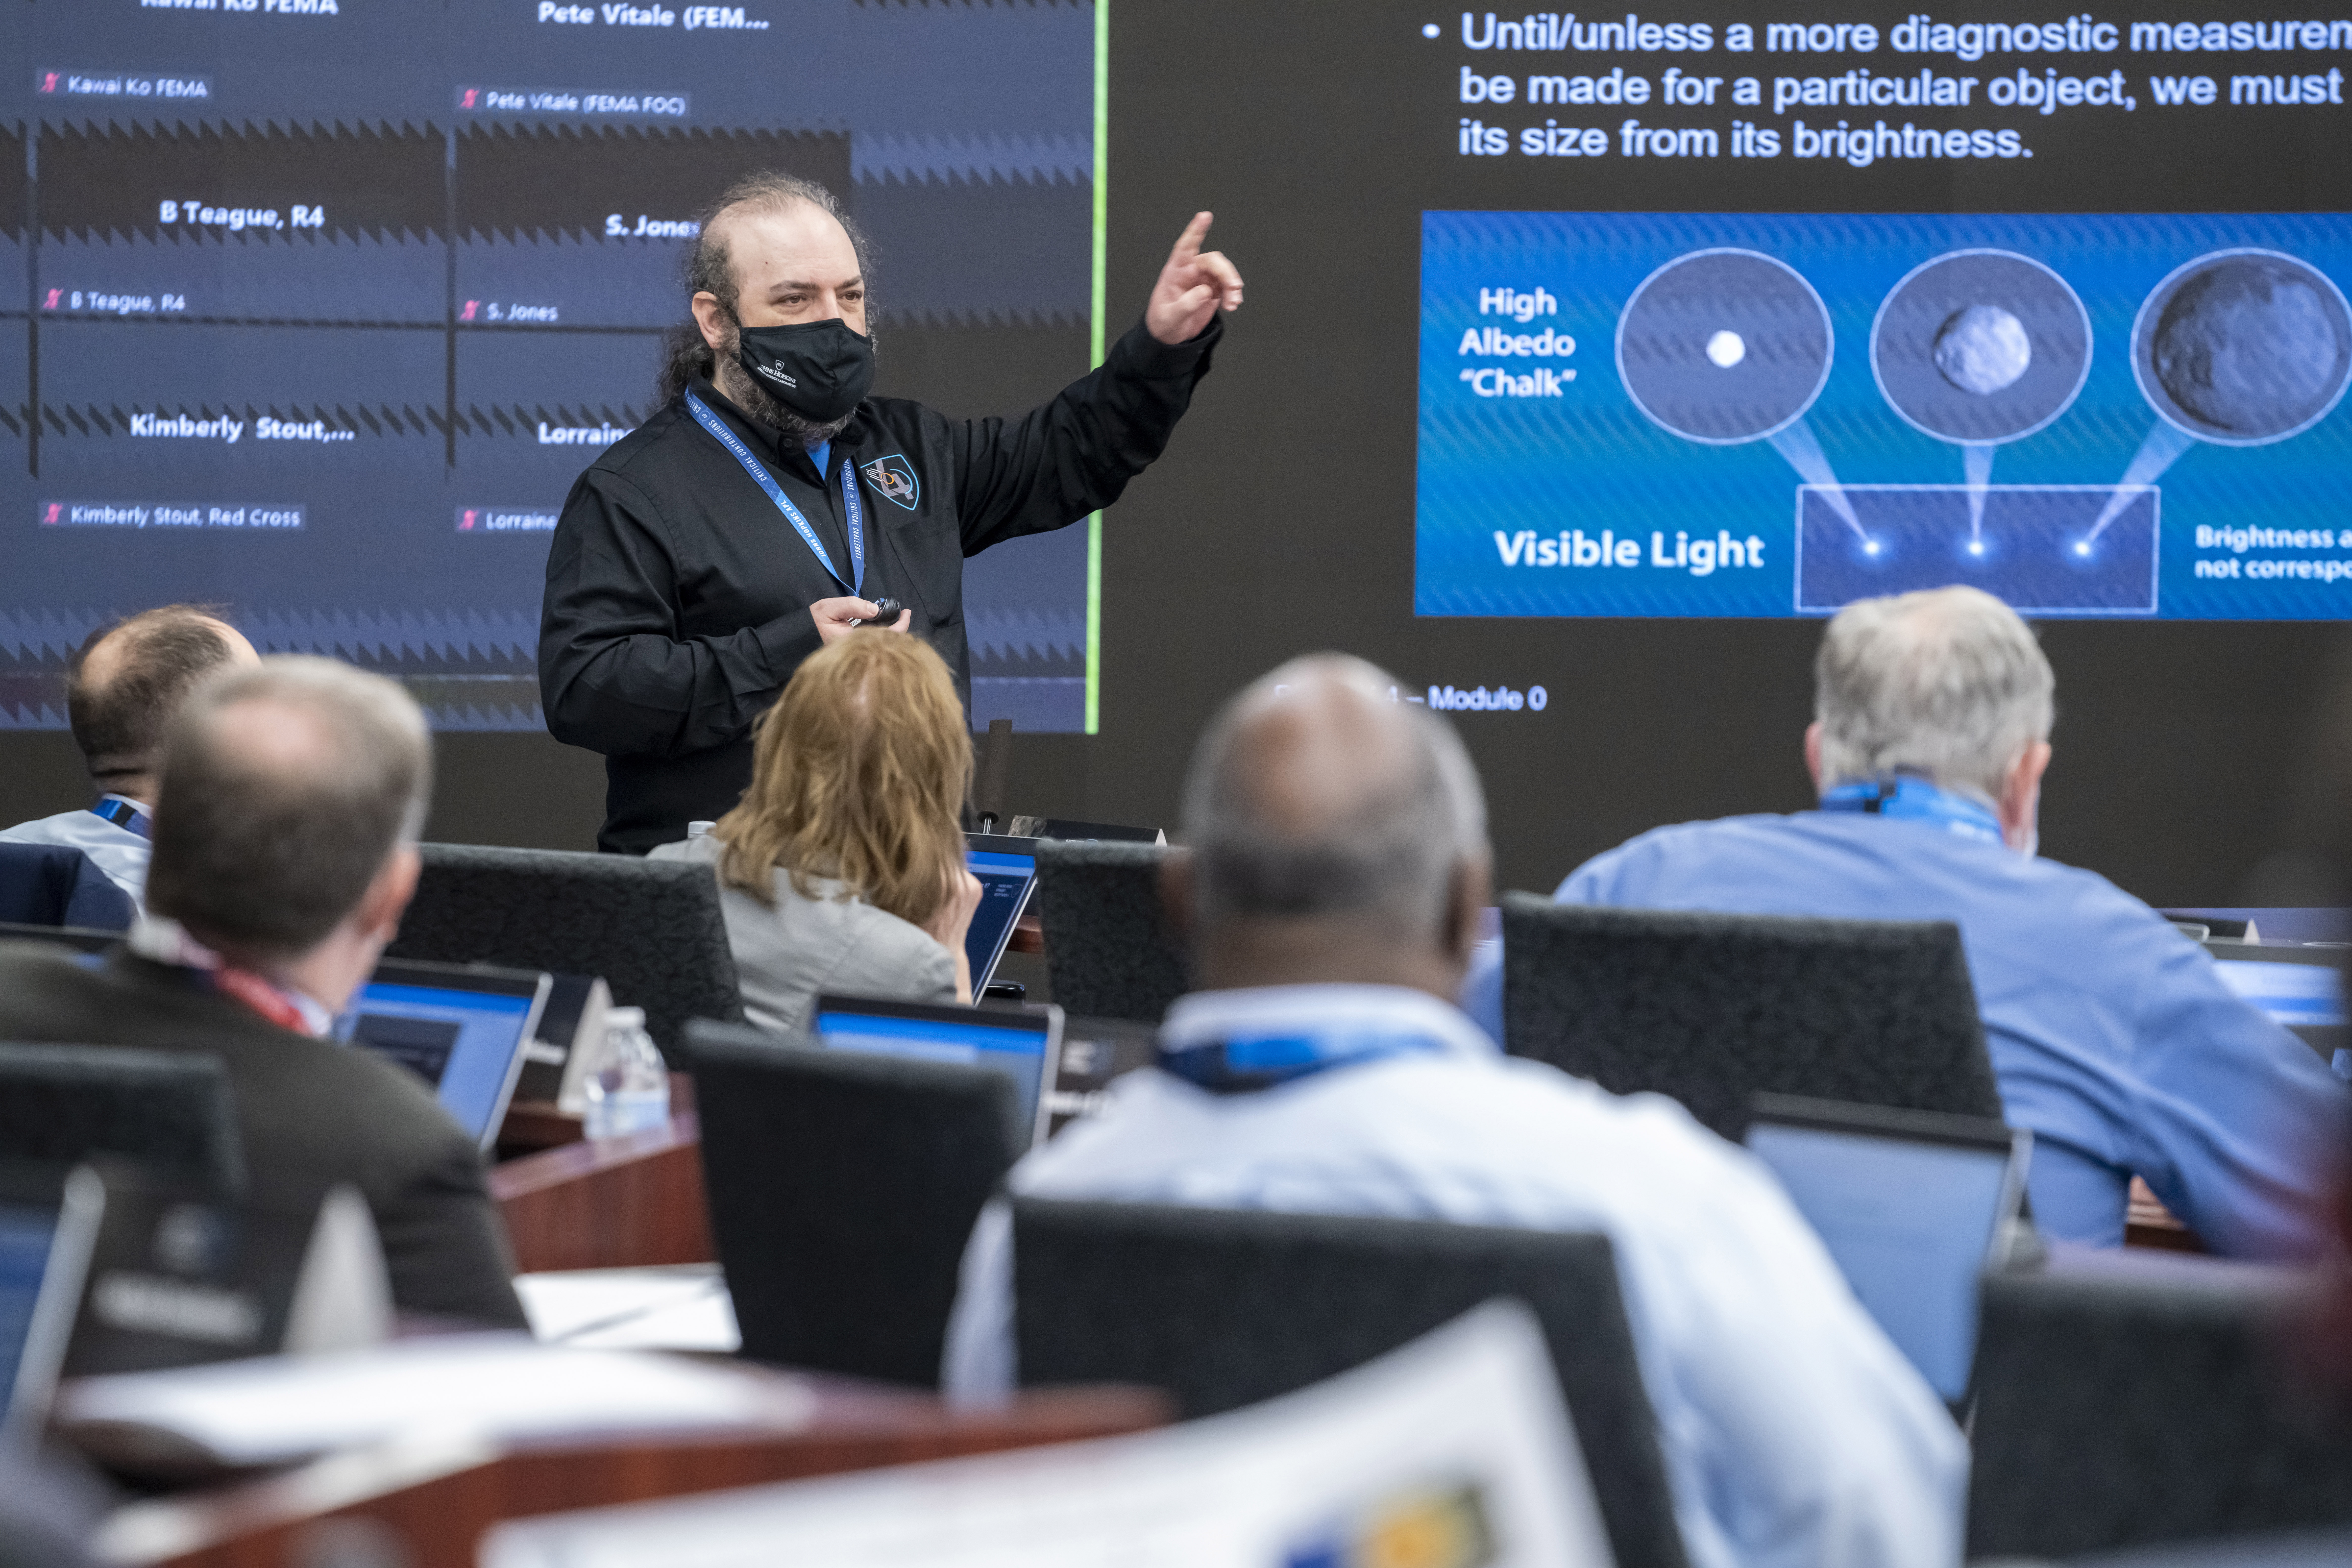 Planetary Scientist Andy Rivkin guides participants though a portion of the Planetary Defense Interagency Tabletop Exercise